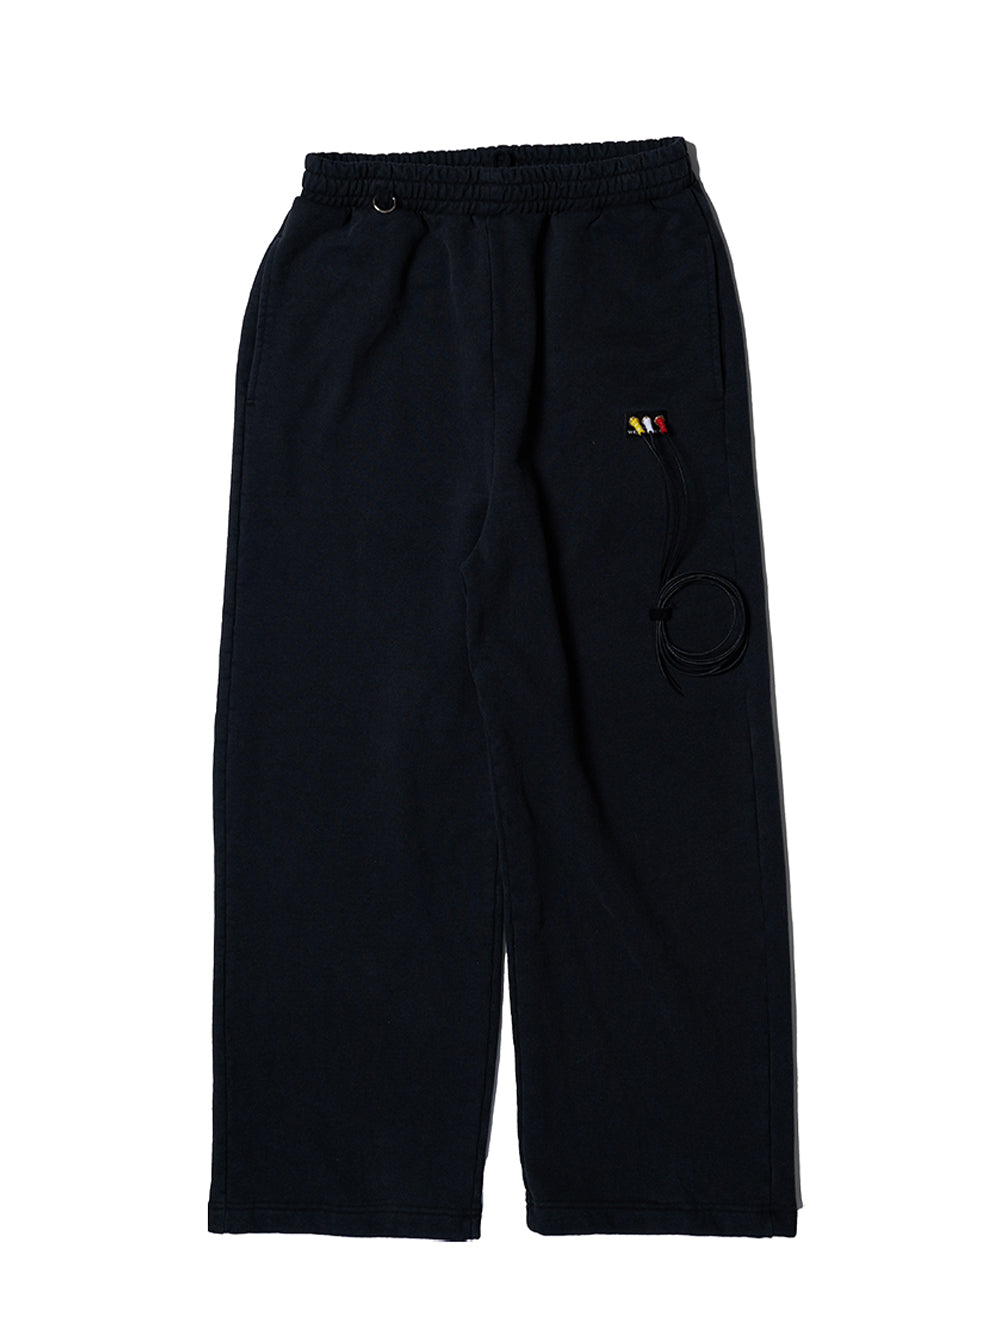 RCA Cable Embroidery Sweatpants (Black)